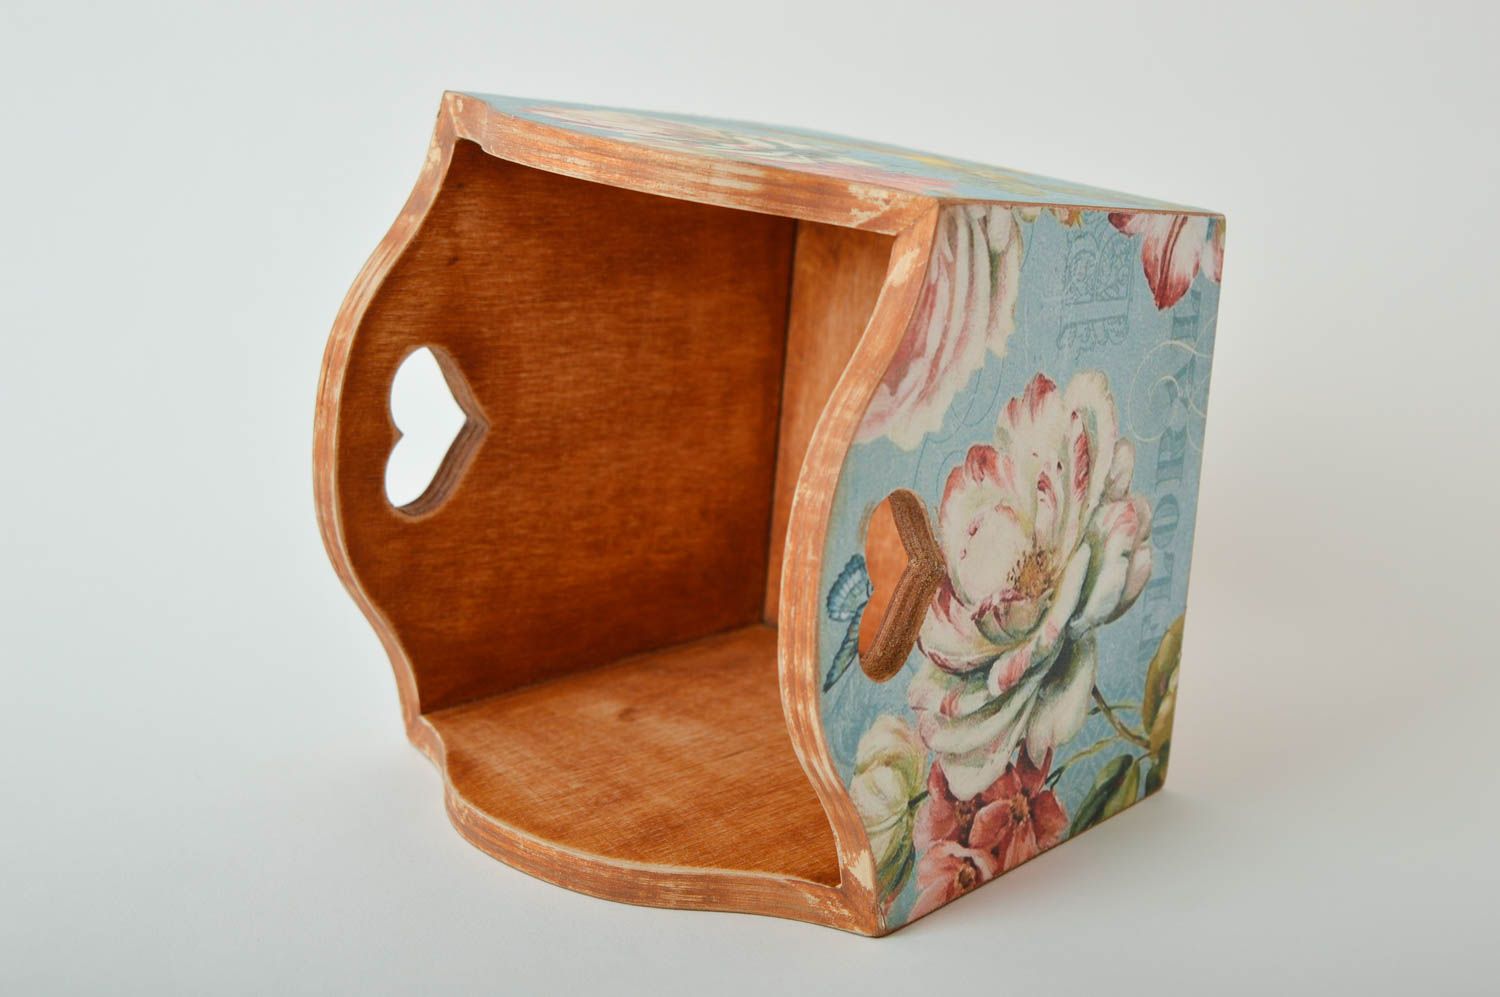 Handmade wooden candy box decorative basket storage container wooden gifts photo 4